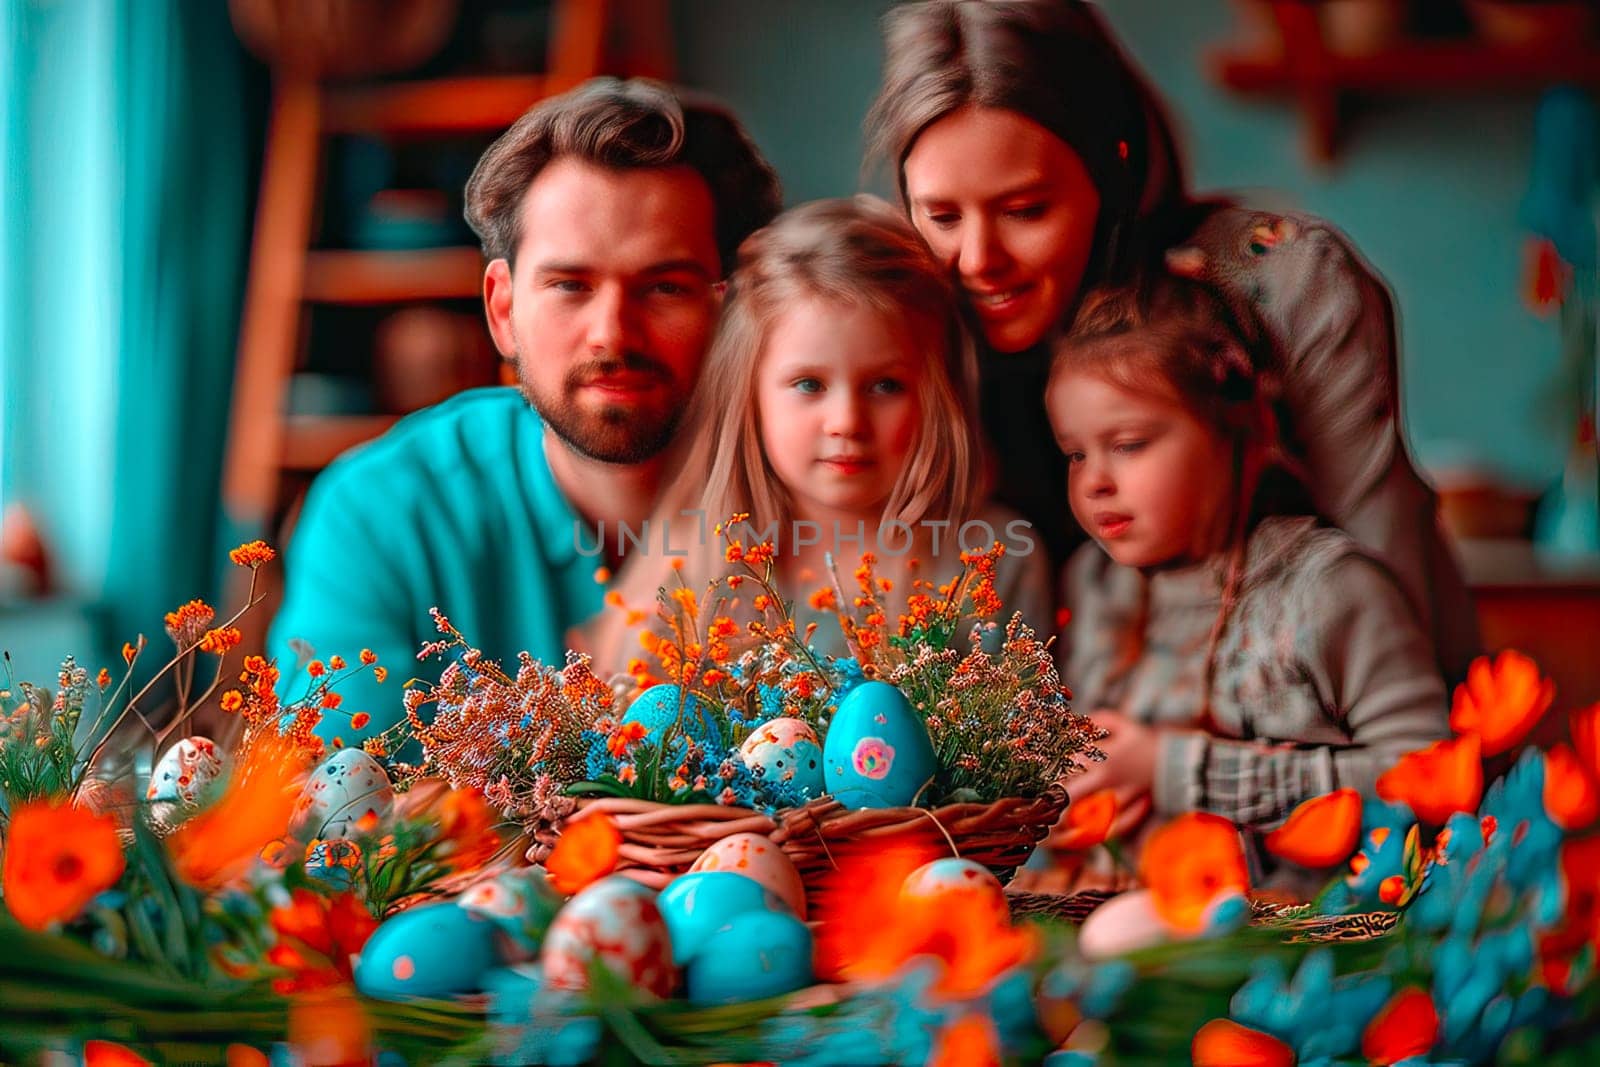 The family poses for a photo. In the foreground are several Easter centrepieces with Easter eggs and flowers. The family visible in the background is out of focus.